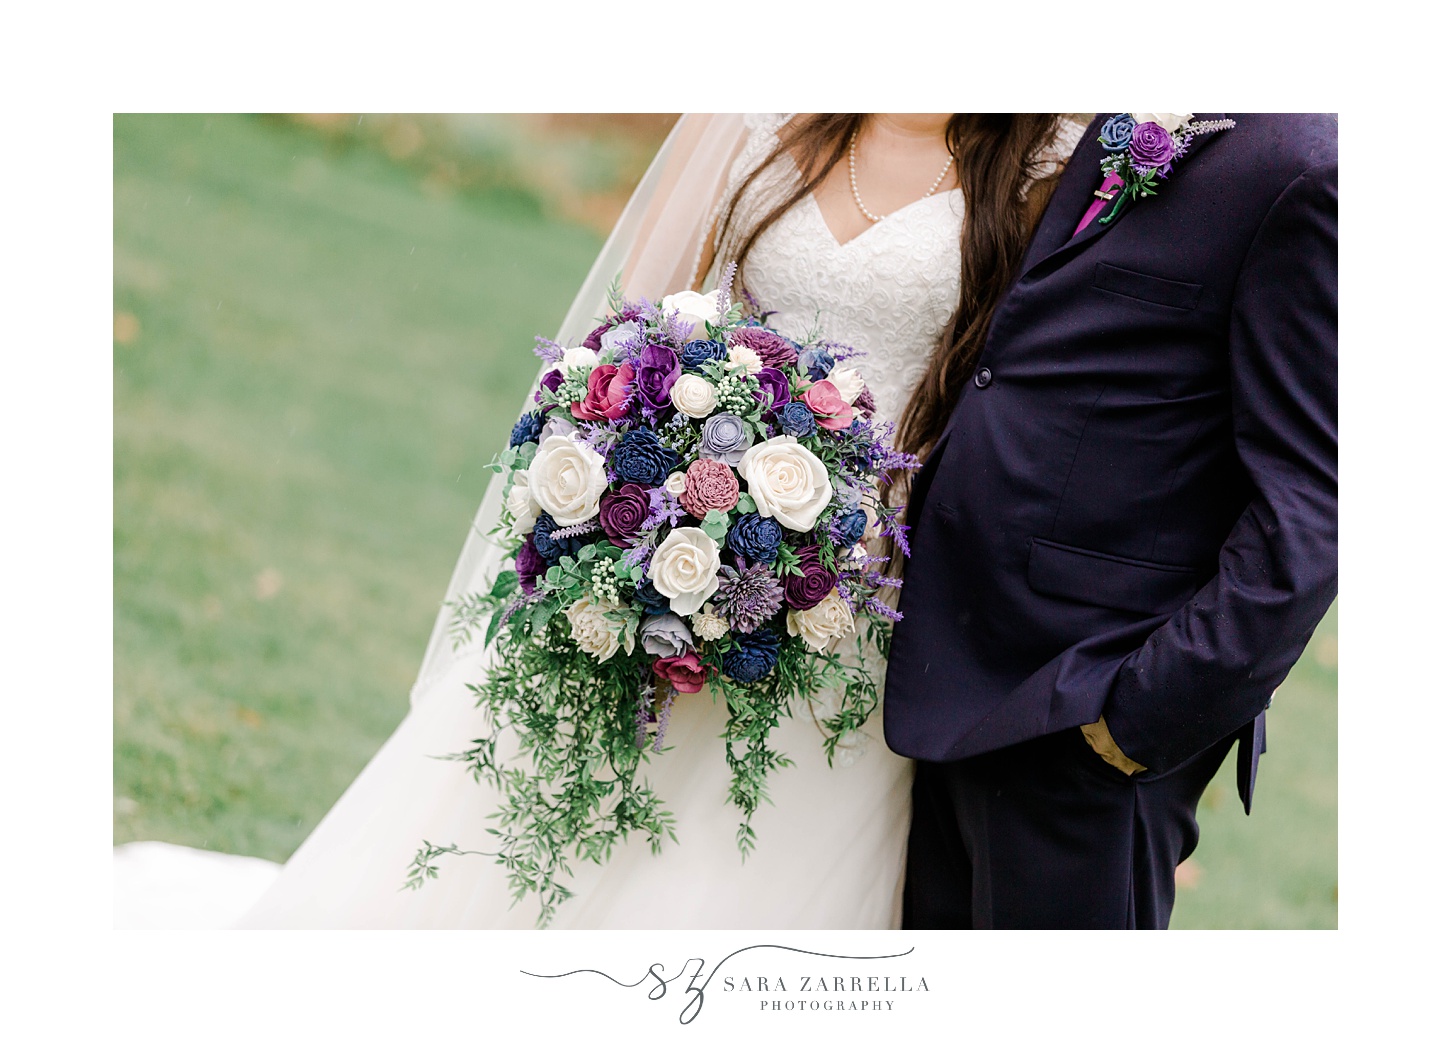 newlyweds hug while bride holds bouquet of purple and white flowers 